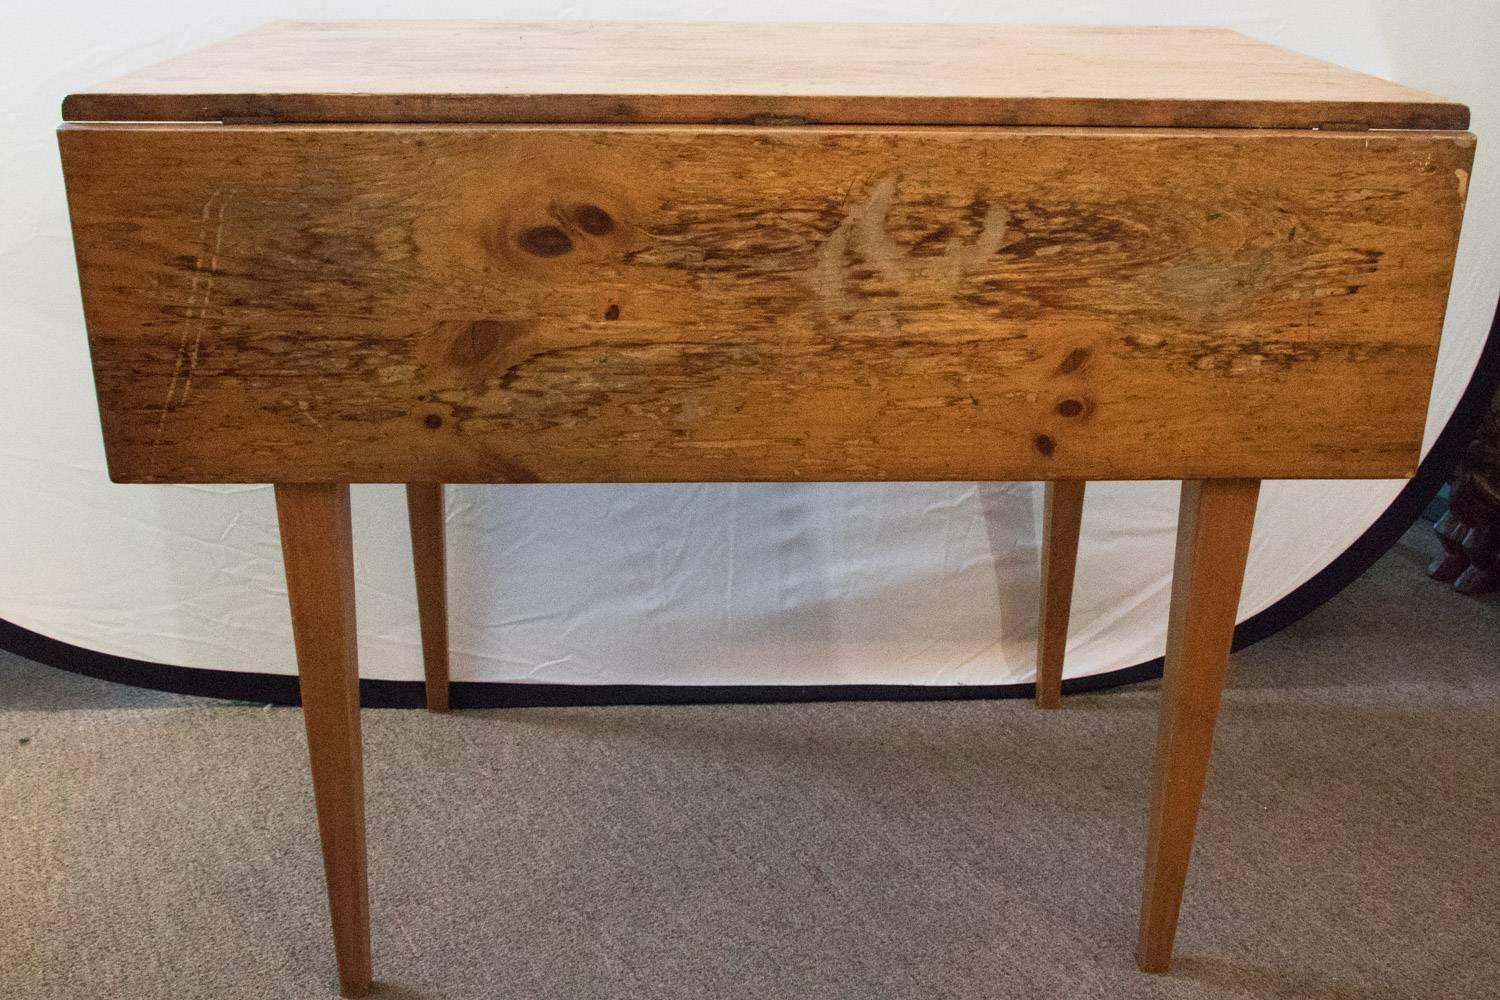 Fabulous Petite French farmhouse table reclaimed pine drop-leaf, 19th century. A beautiful farmhouse table built using rough timbers and native woods. This is a strong and enduring piece that gains beautiful character over time.

Measurements: 36 L